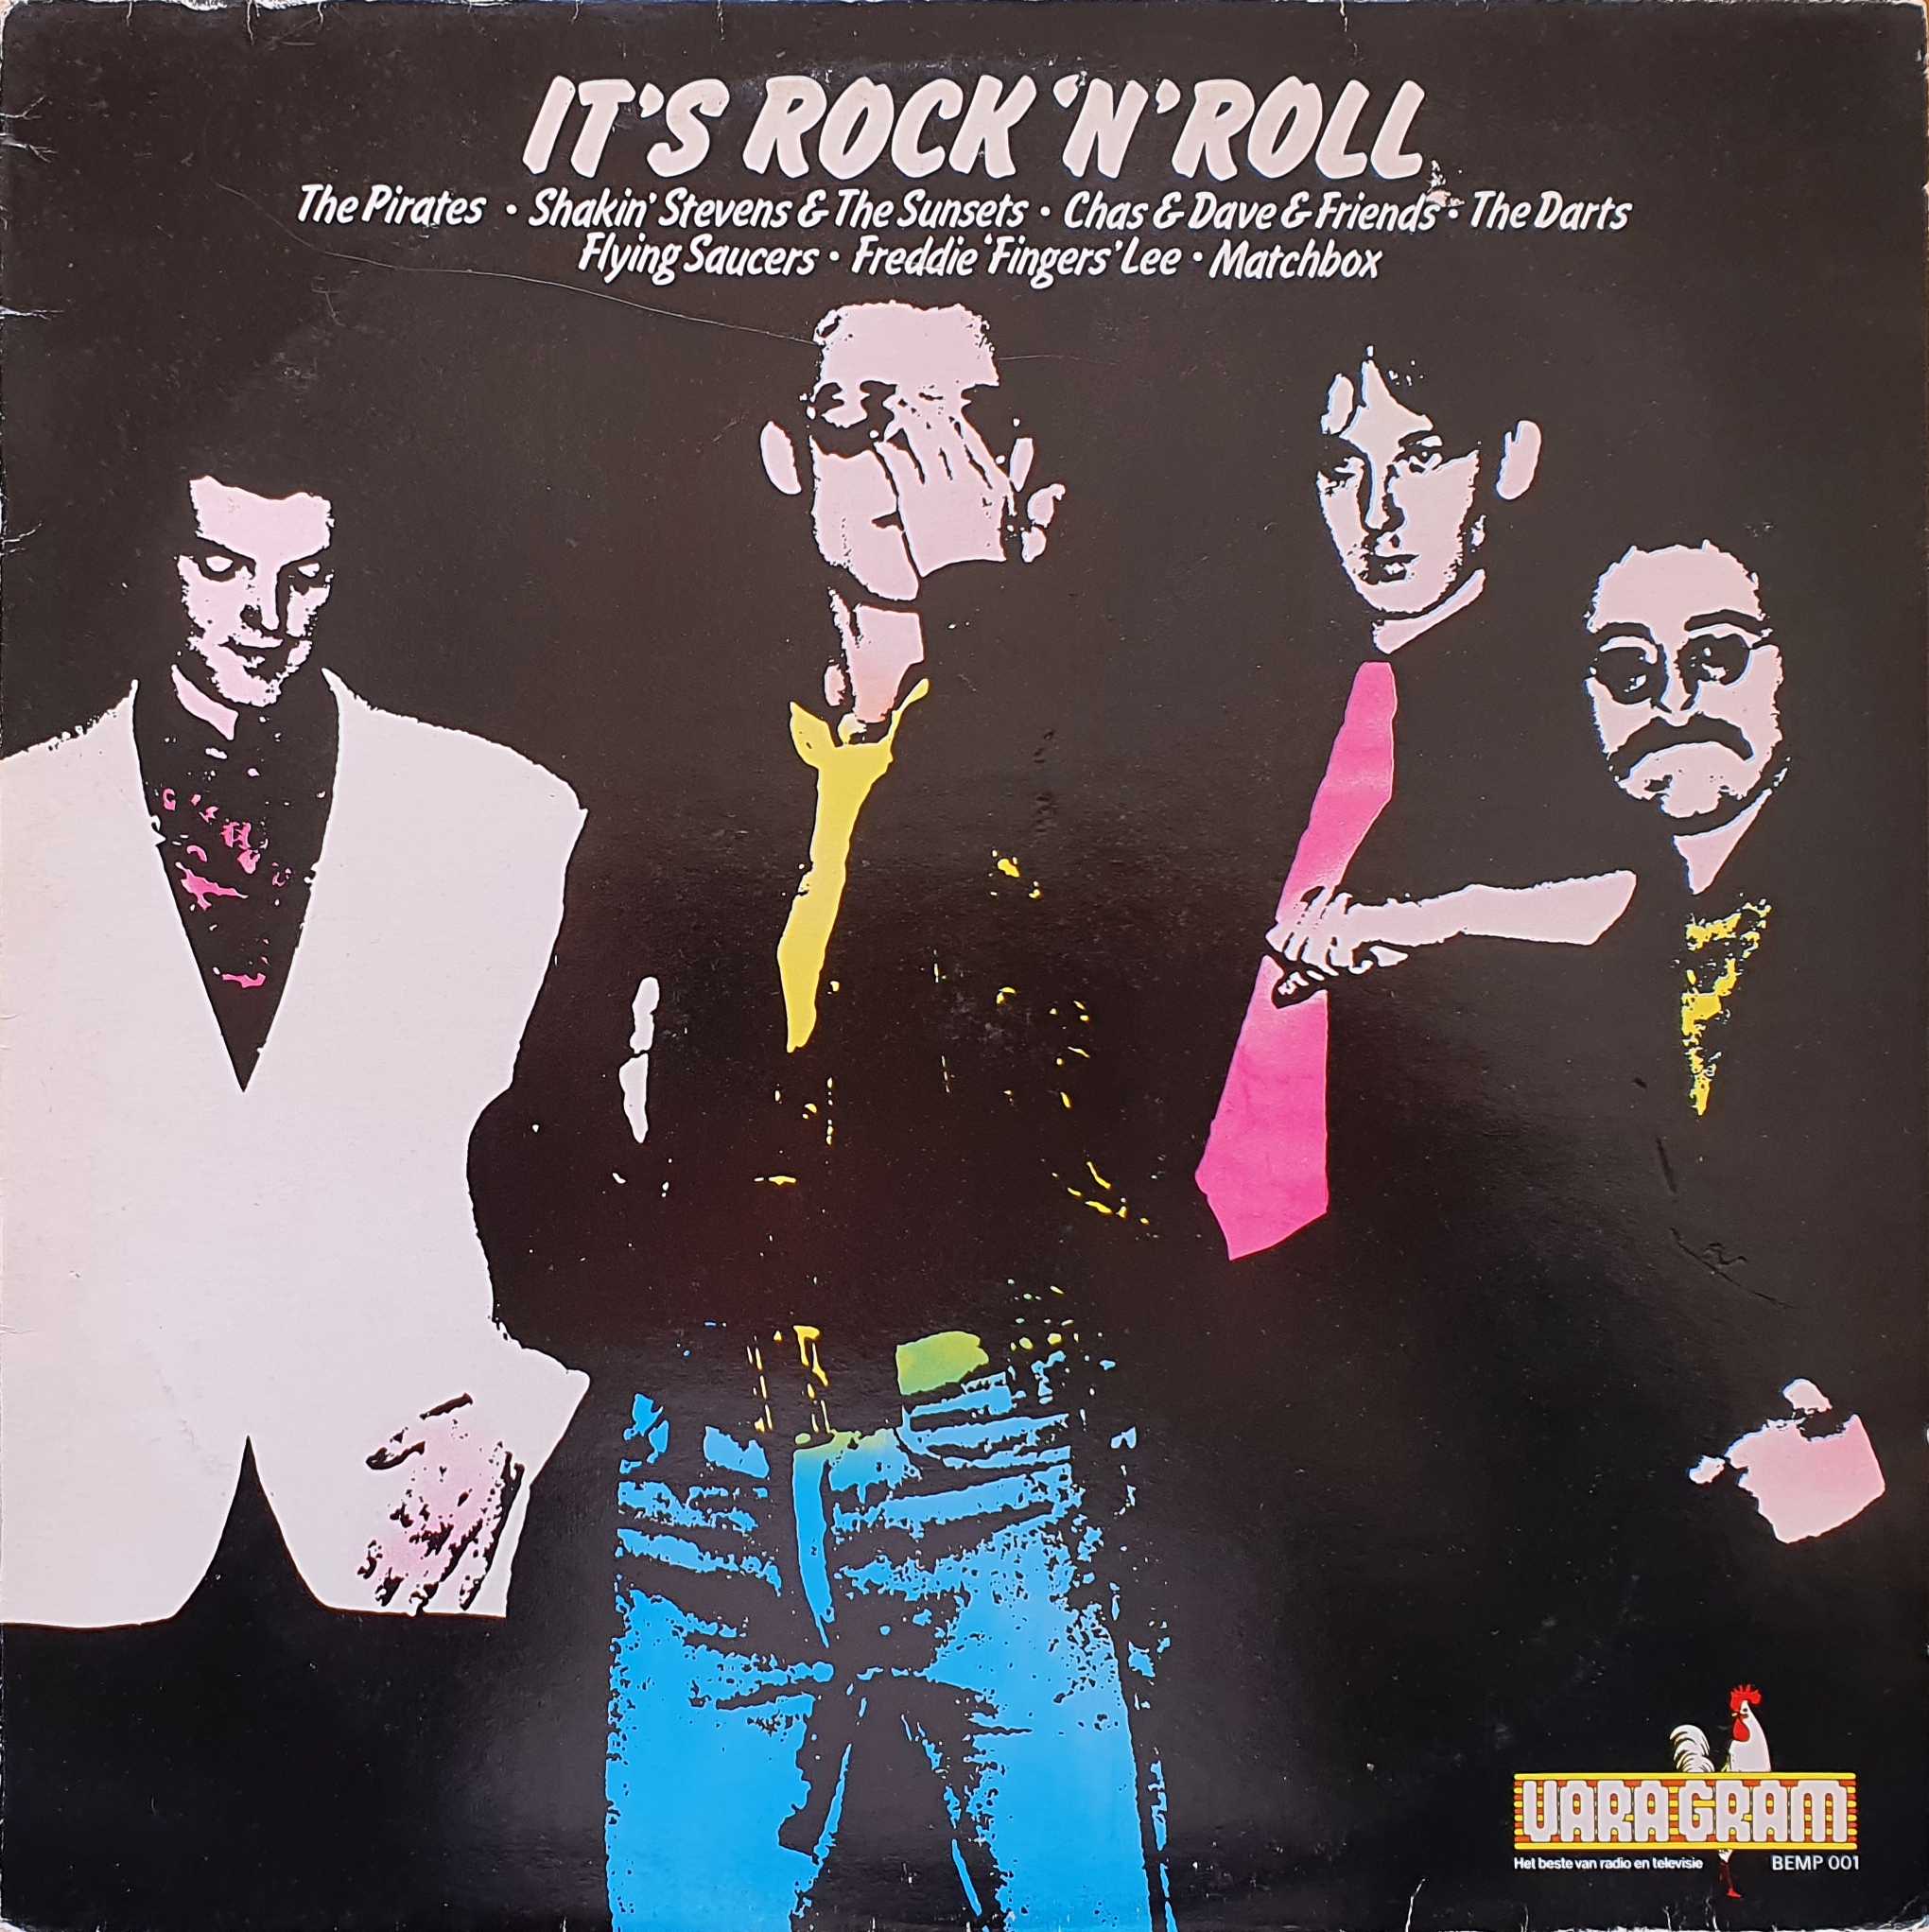 Picture of BEMP 001-iD It's rock 'n' roll (Dutch import) by artist Various from the BBC albums - Records and Tapes library